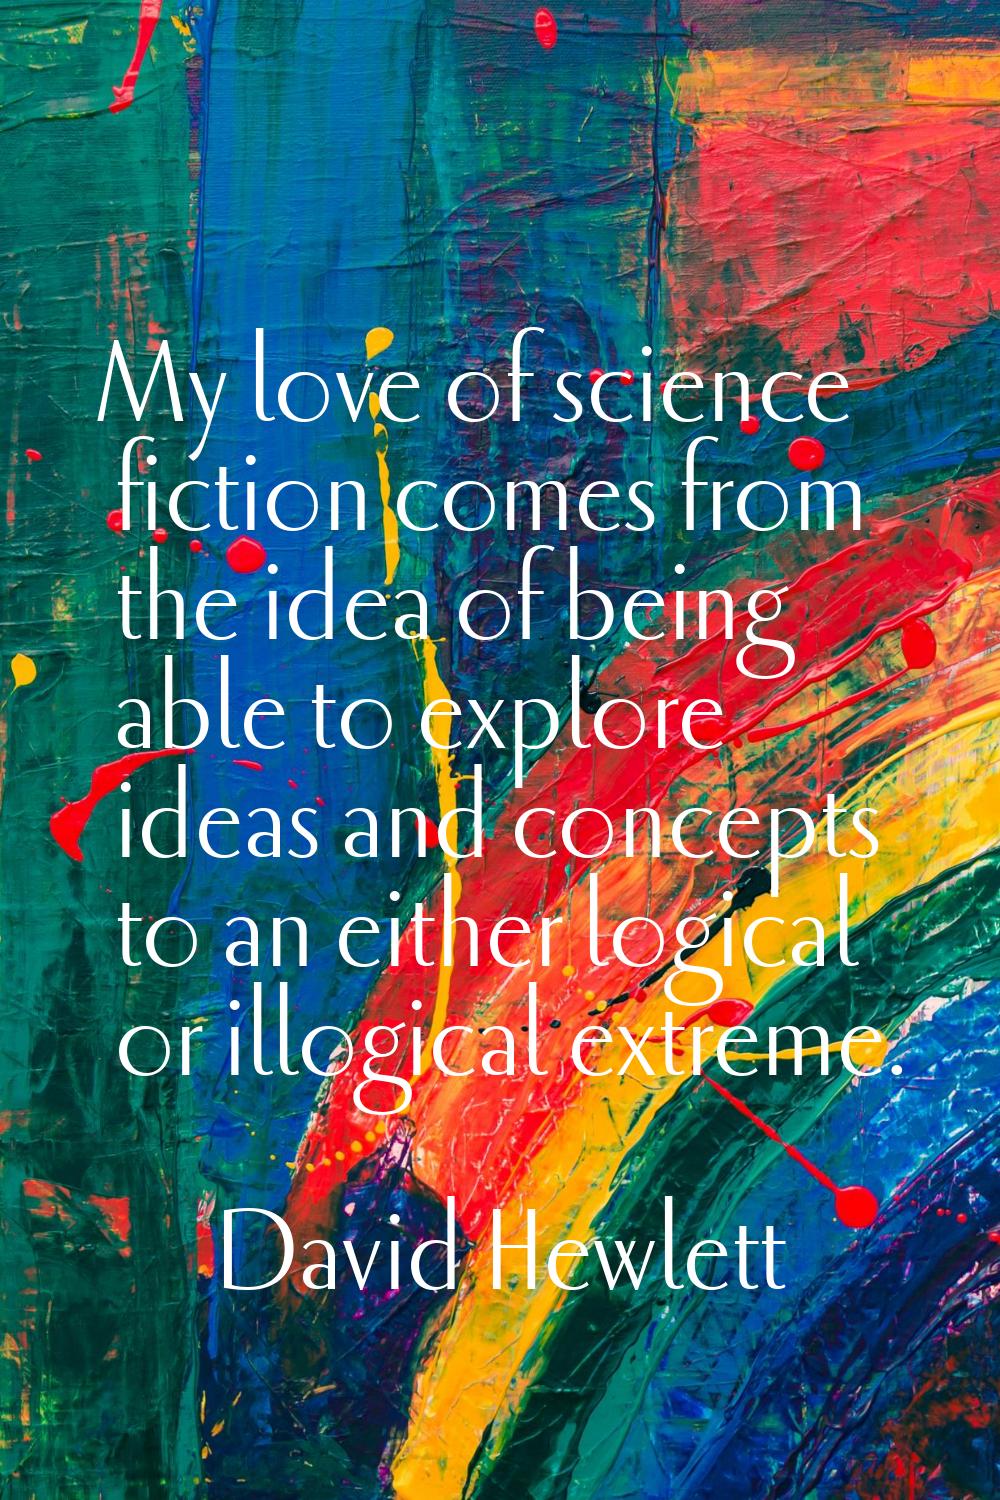 My love of science fiction comes from the idea of being able to explore ideas and concepts to an ei